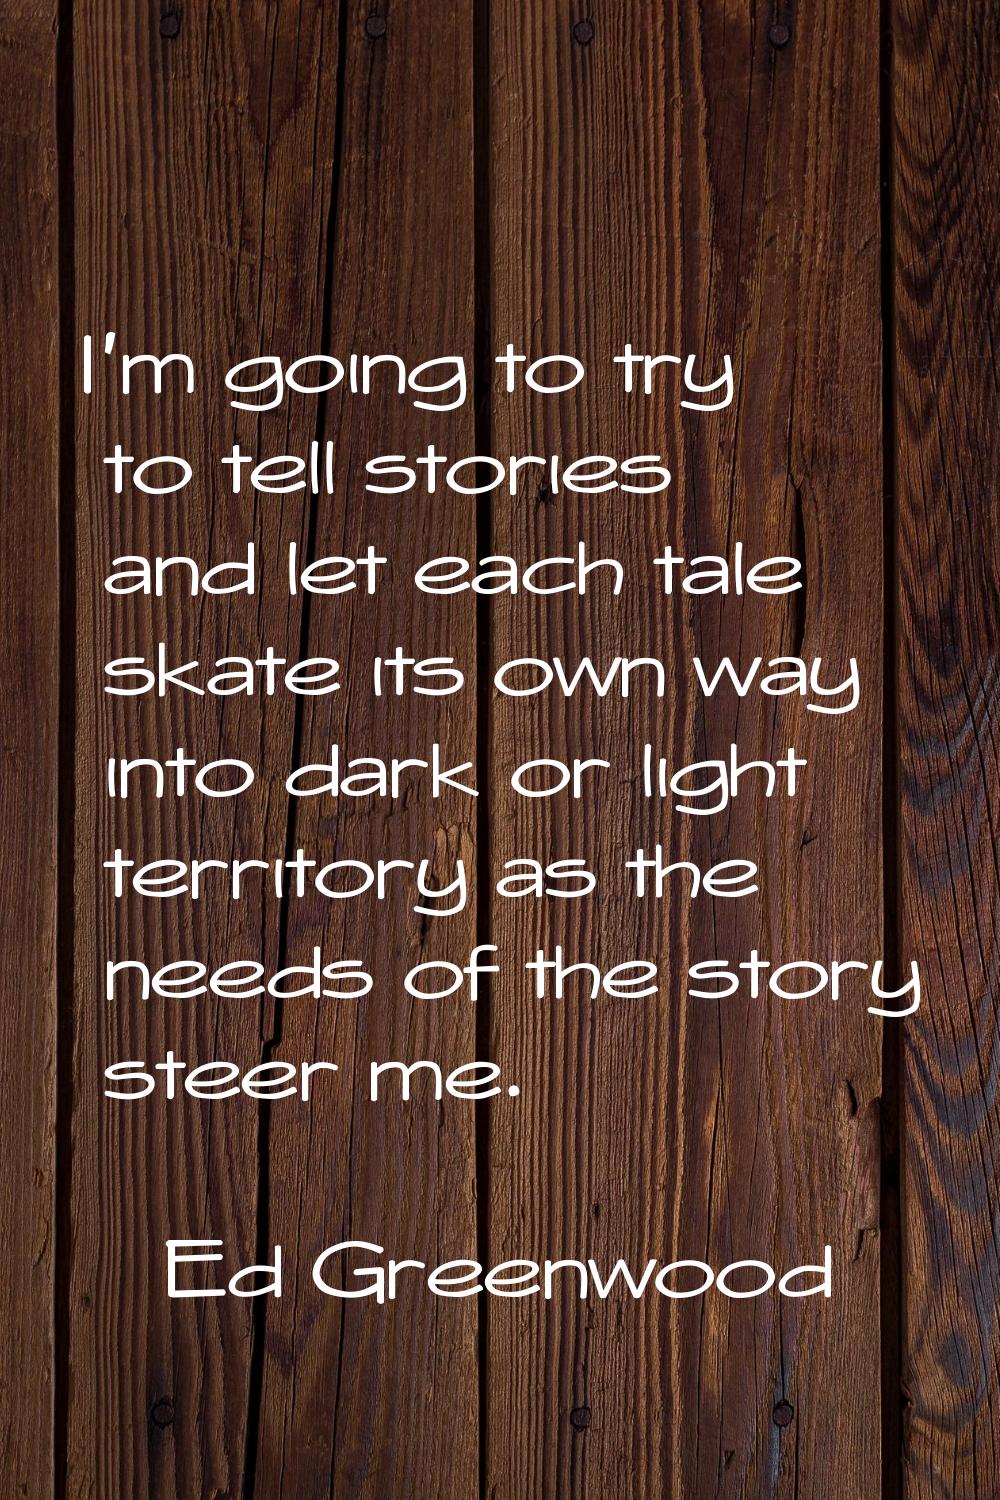 I'm going to try to tell stories and let each tale skate its own way into dark or light territory a